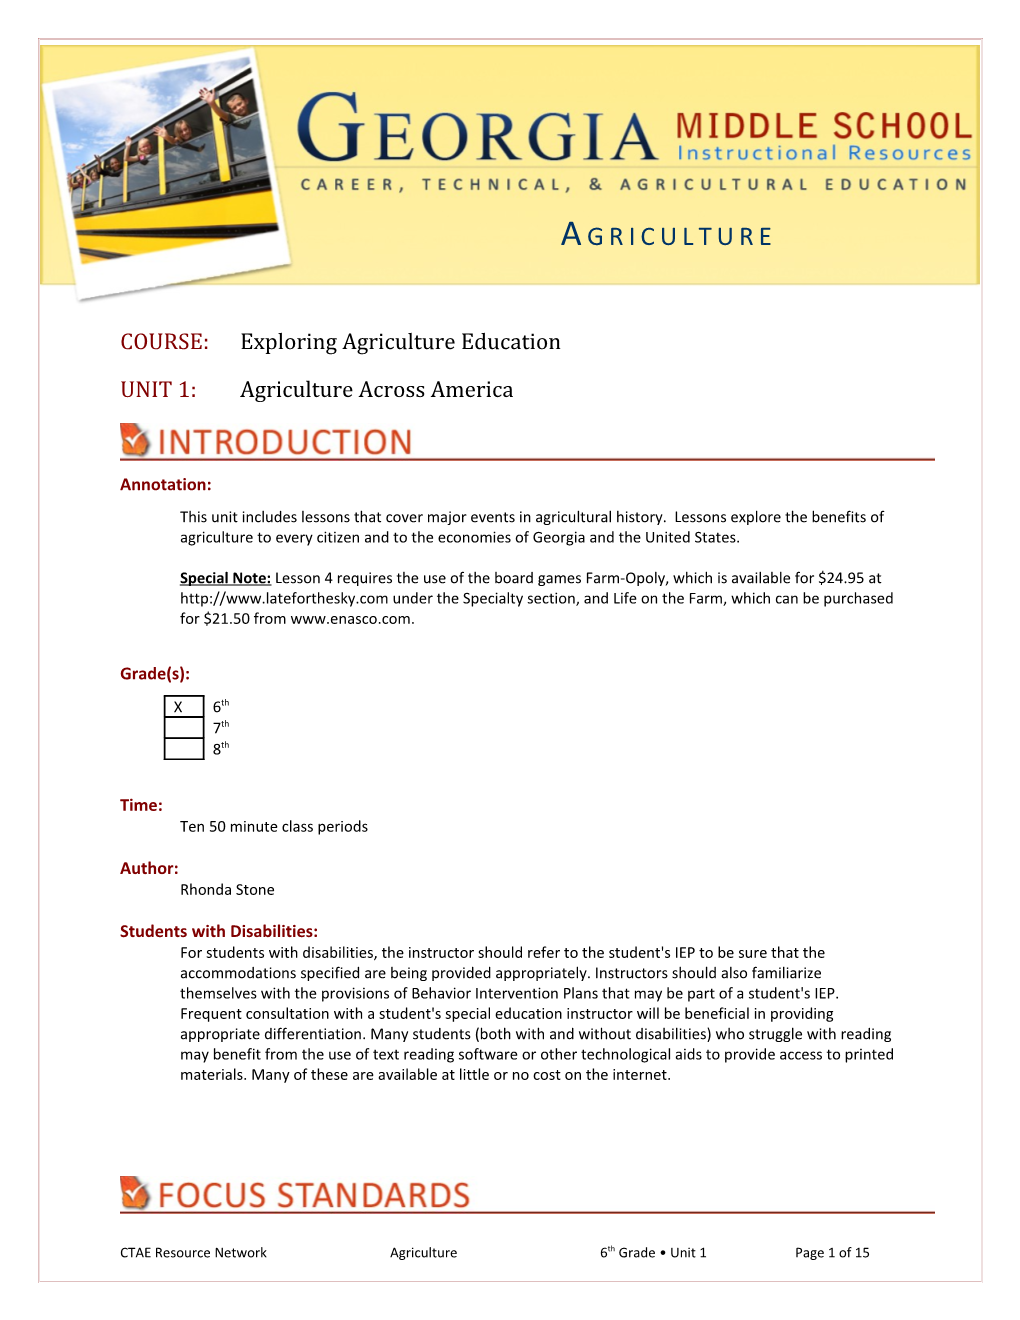 COURSE: Exploring Agriculture Education